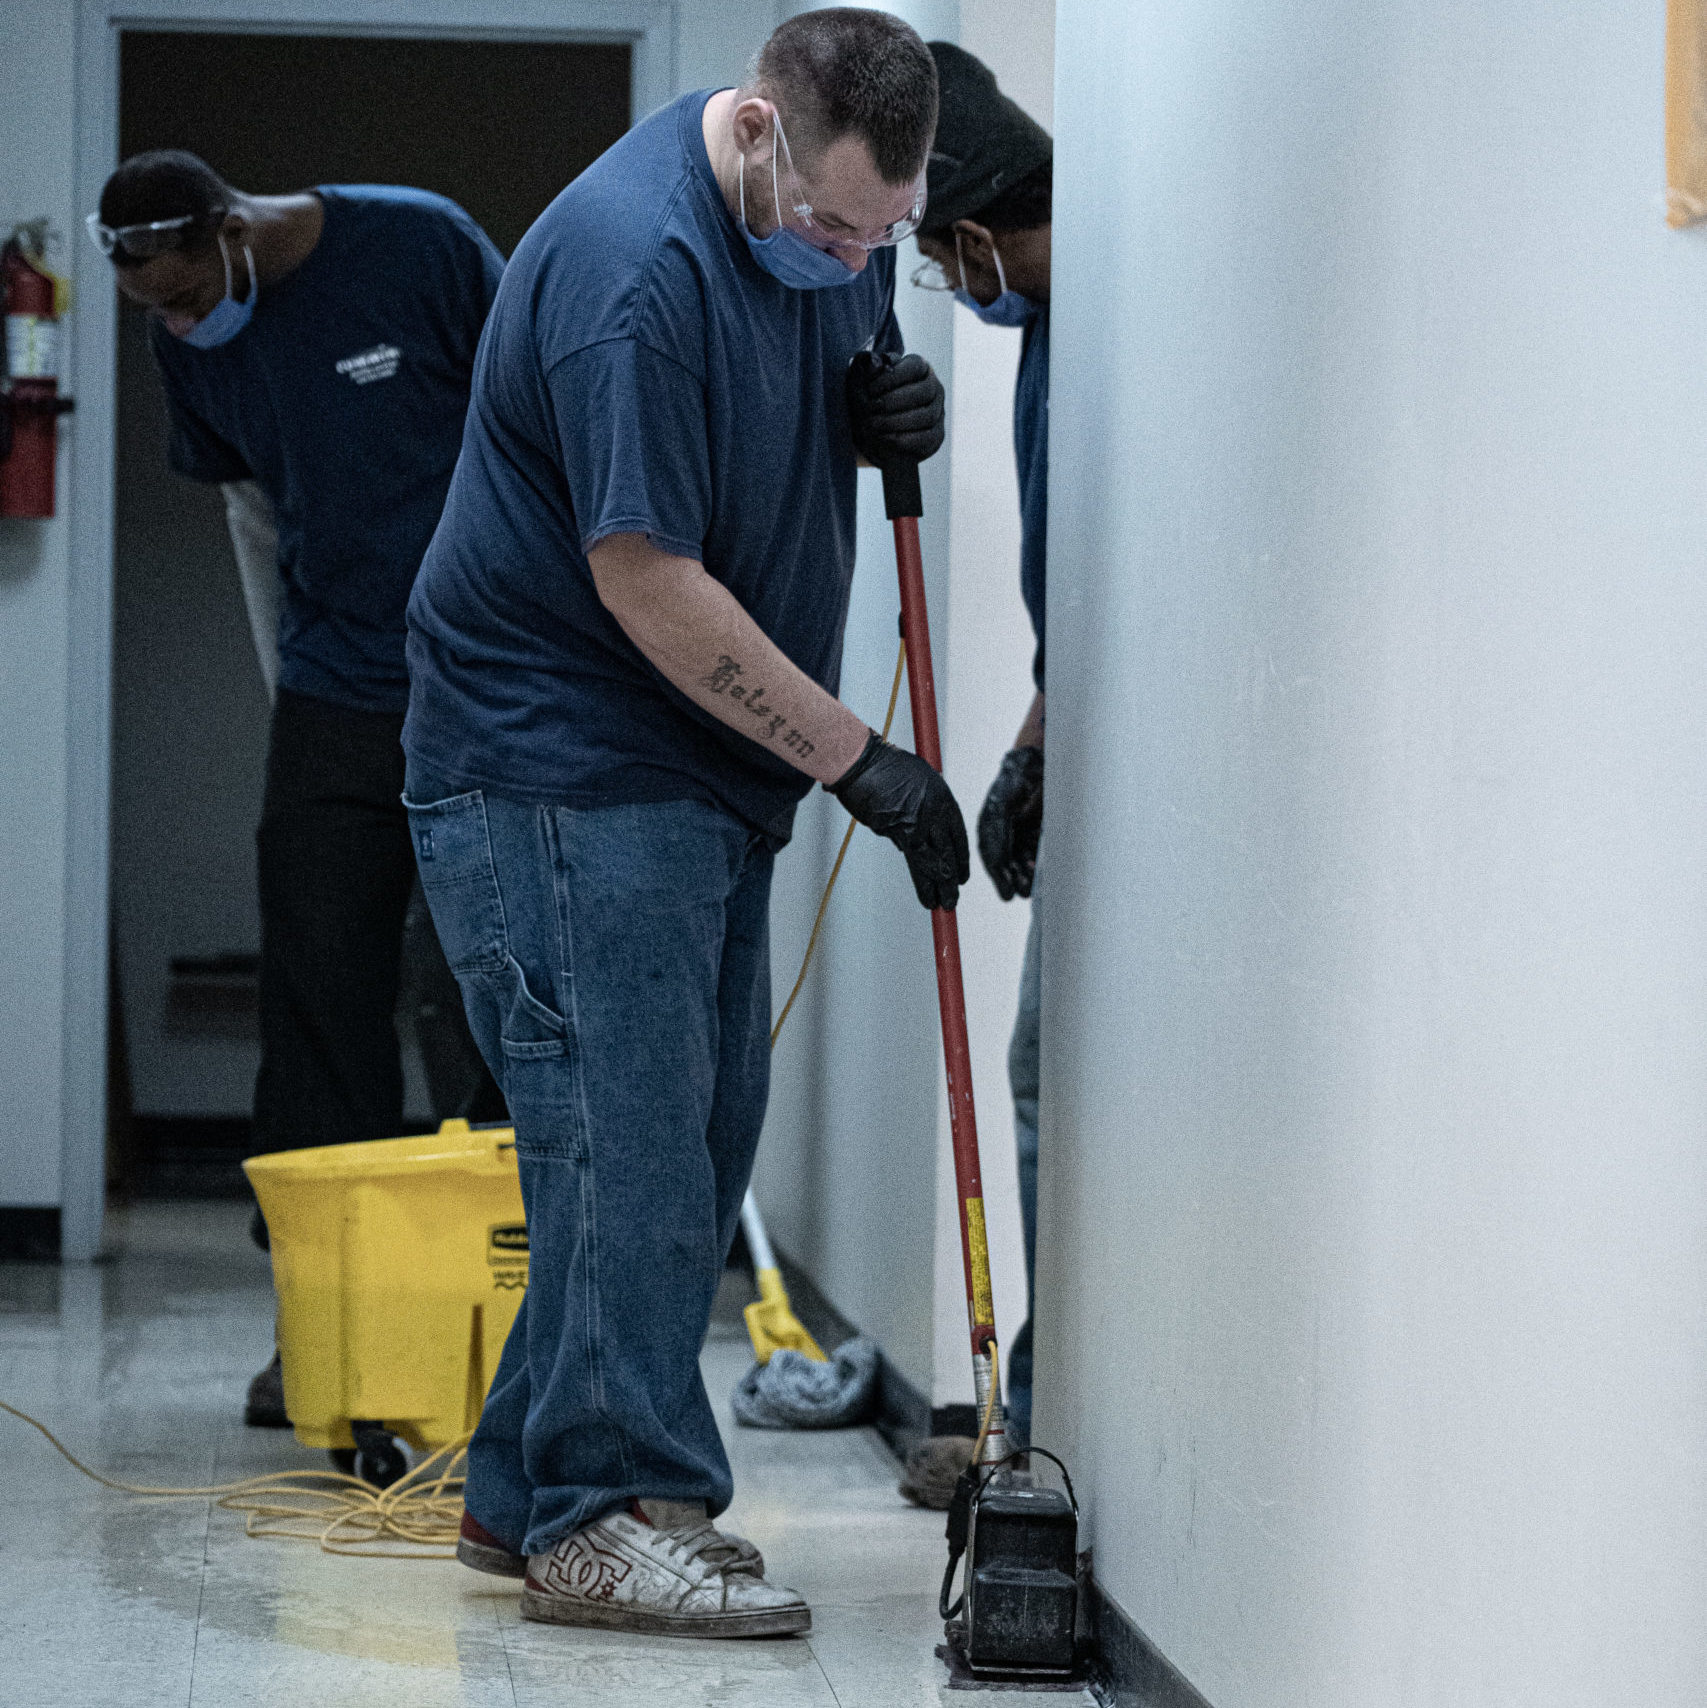 Cummins Facility Services Team: Employee Cleaning Floor